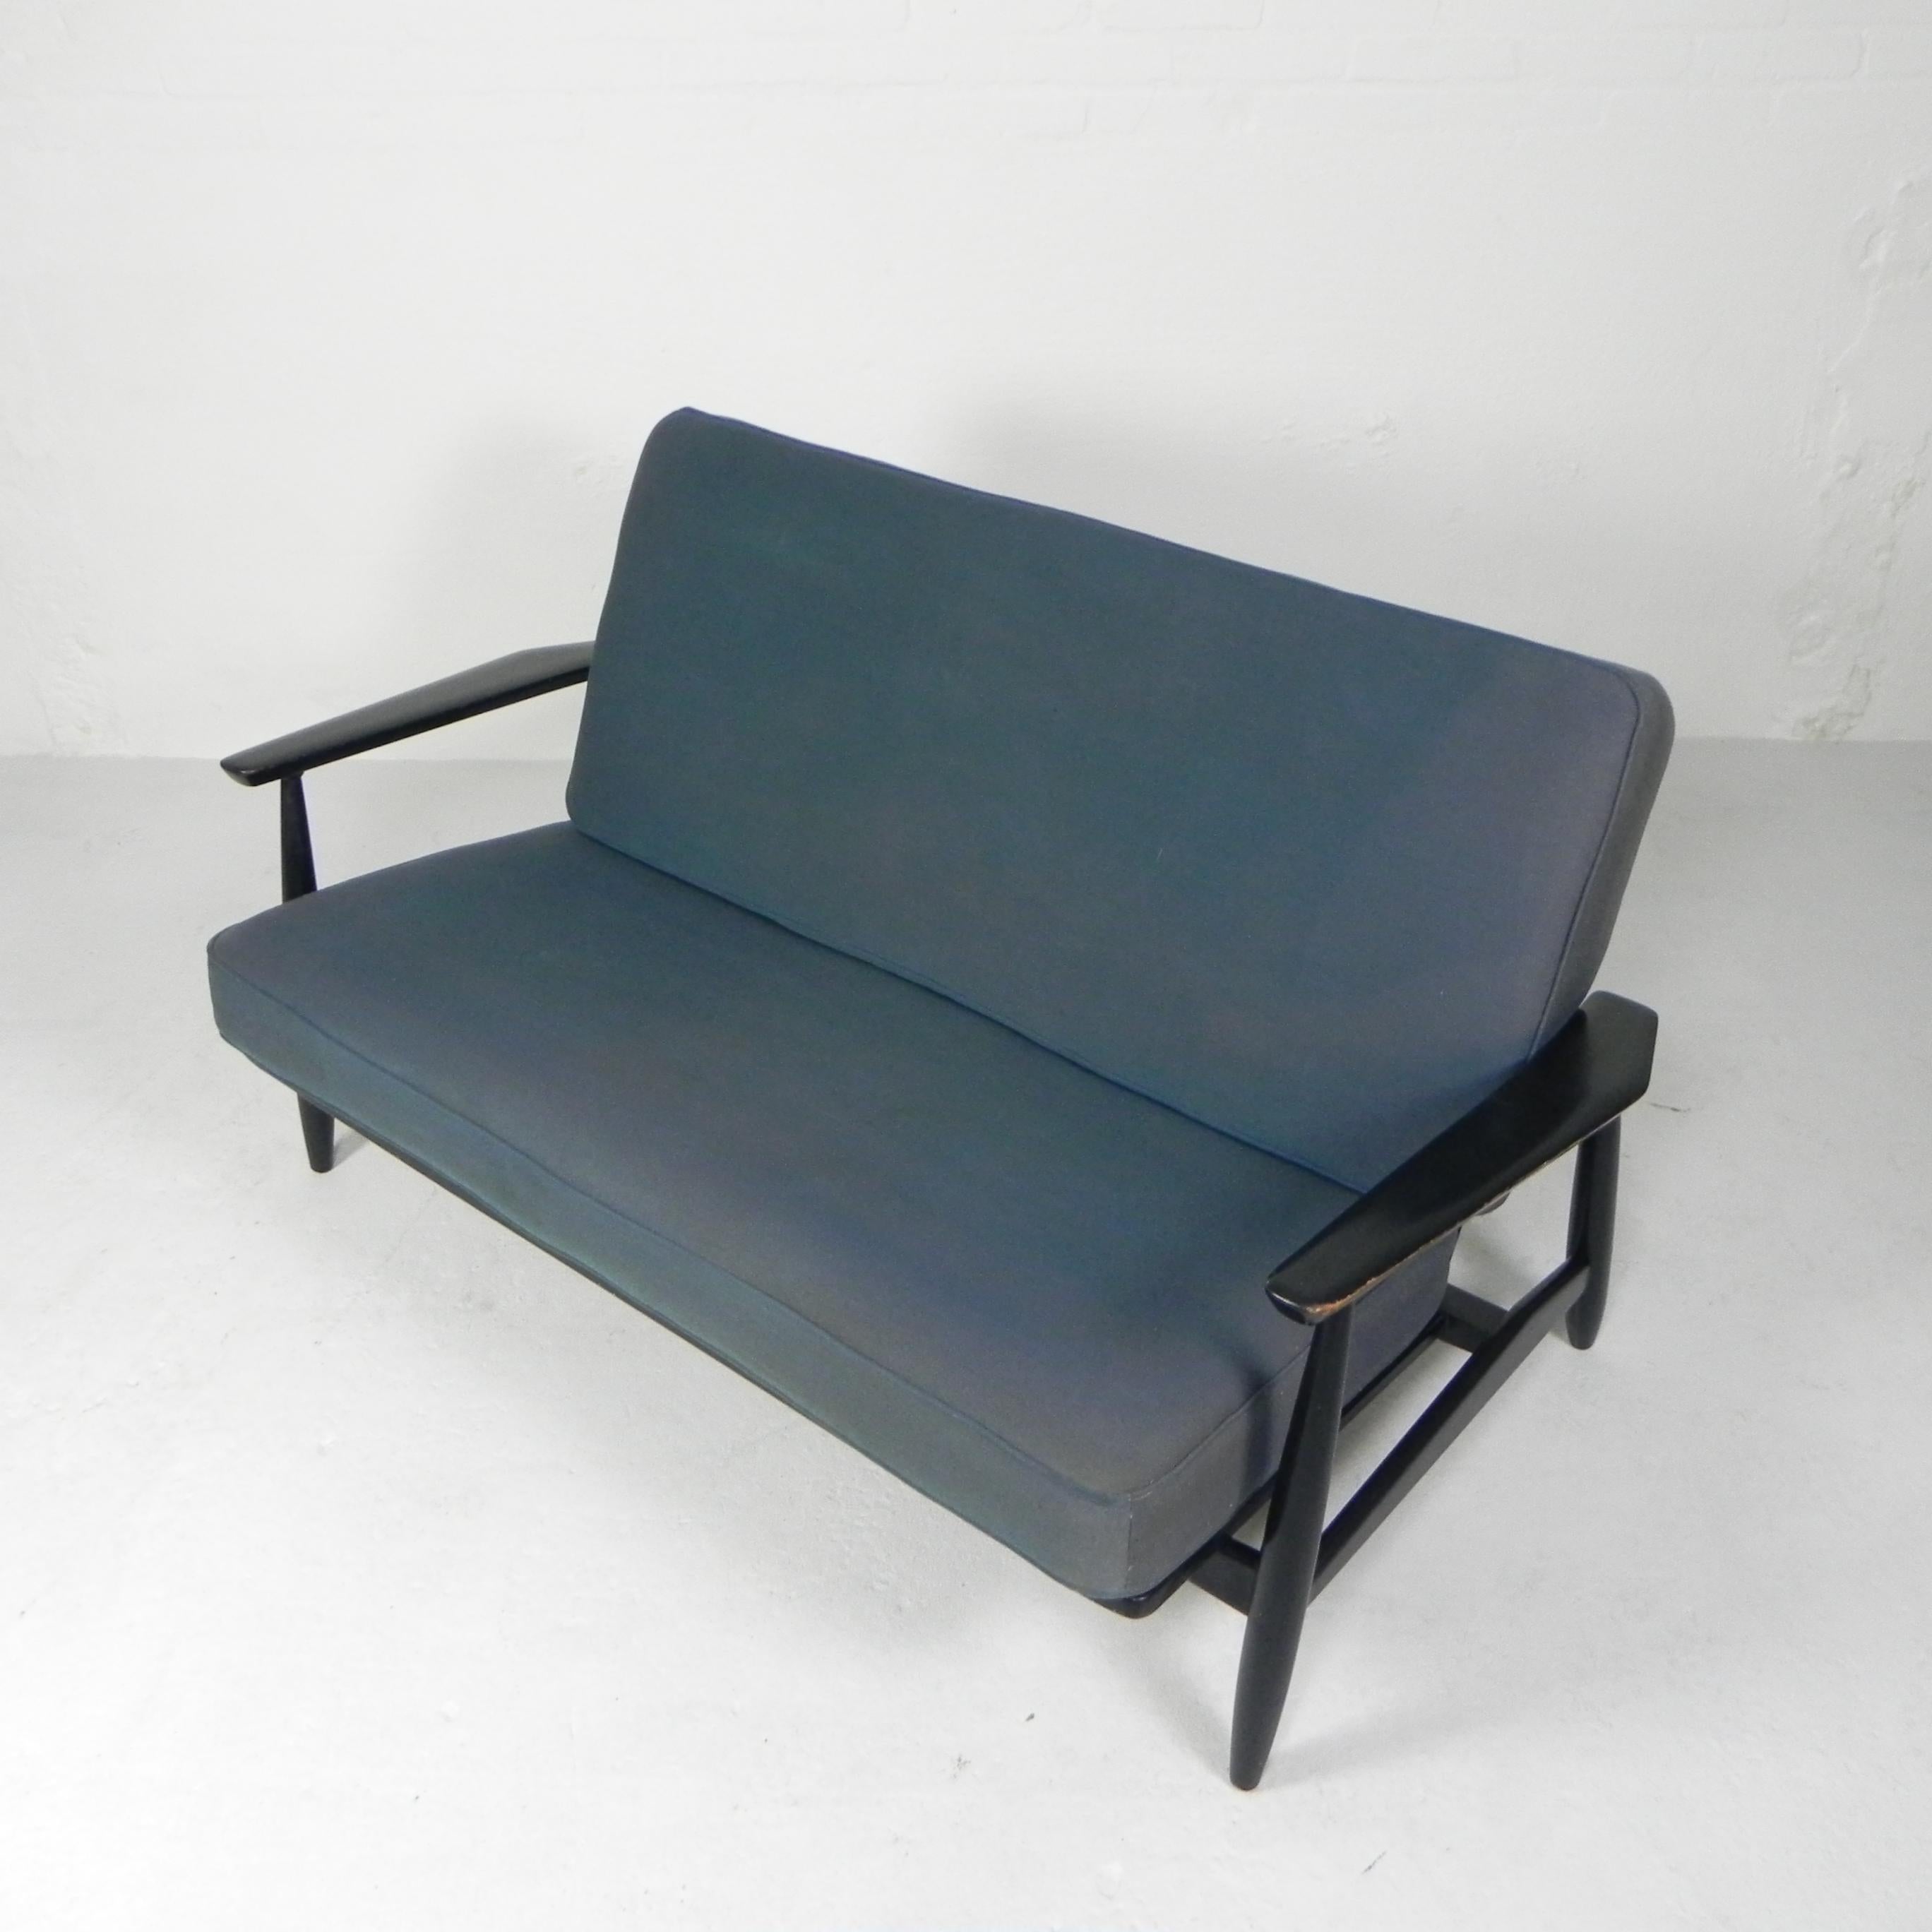 Height: 80 cm.
Width: 144 cm.
Depth: 85 cm.
This two-seater still has the original blue upholstery
with some discolorations.
In short, in a neat vintage condition.
Origin: Denmark, 1960s.
Material: beech / fabric.